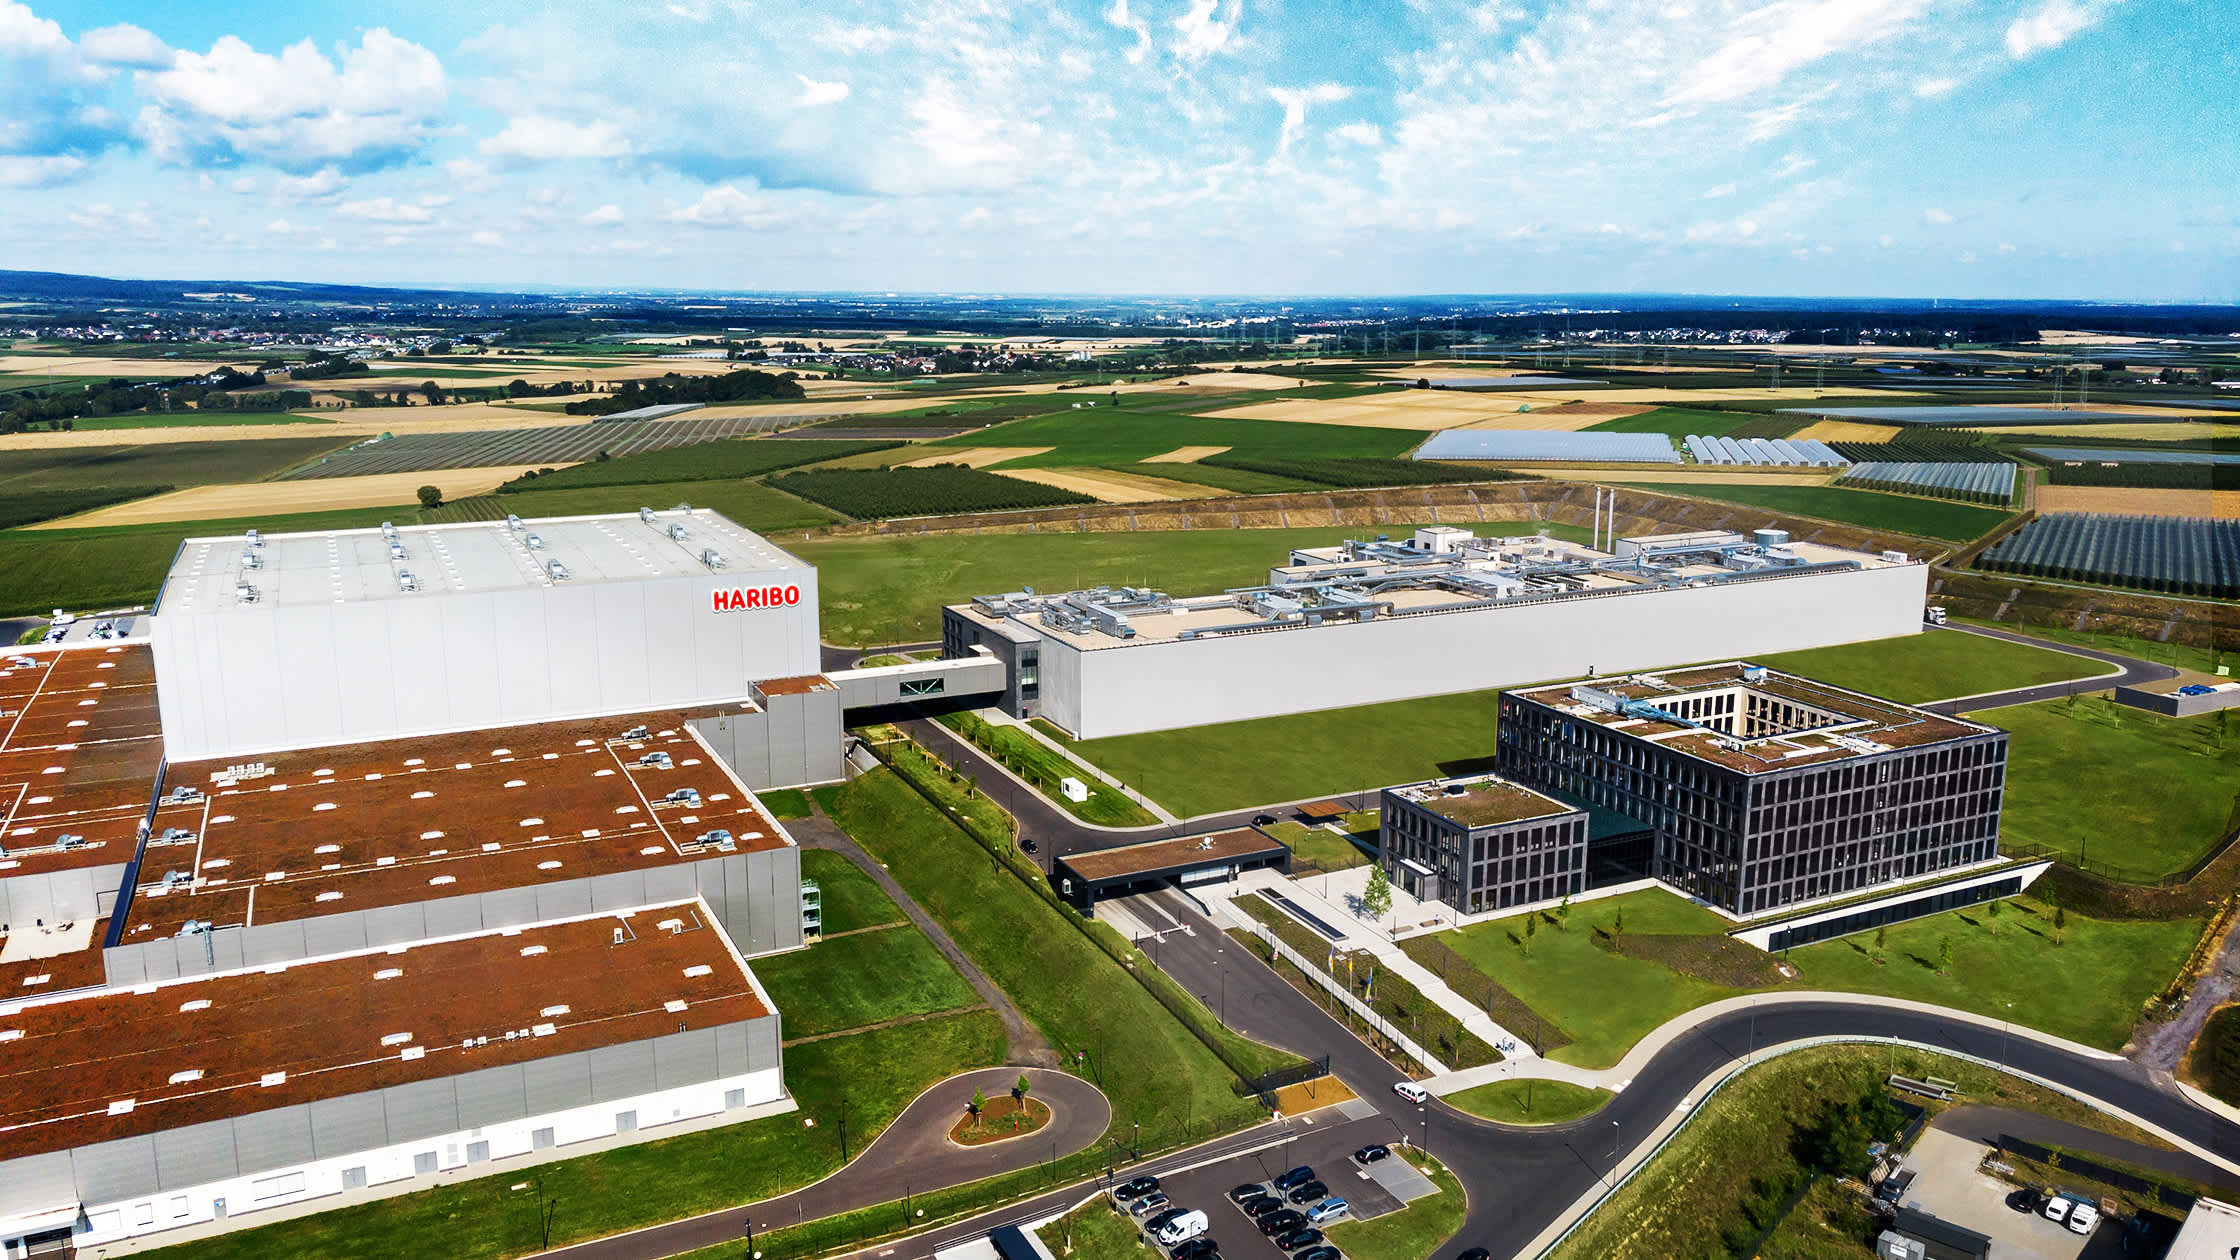 Aerial view of HARIBO company headquarters in Grafschaft